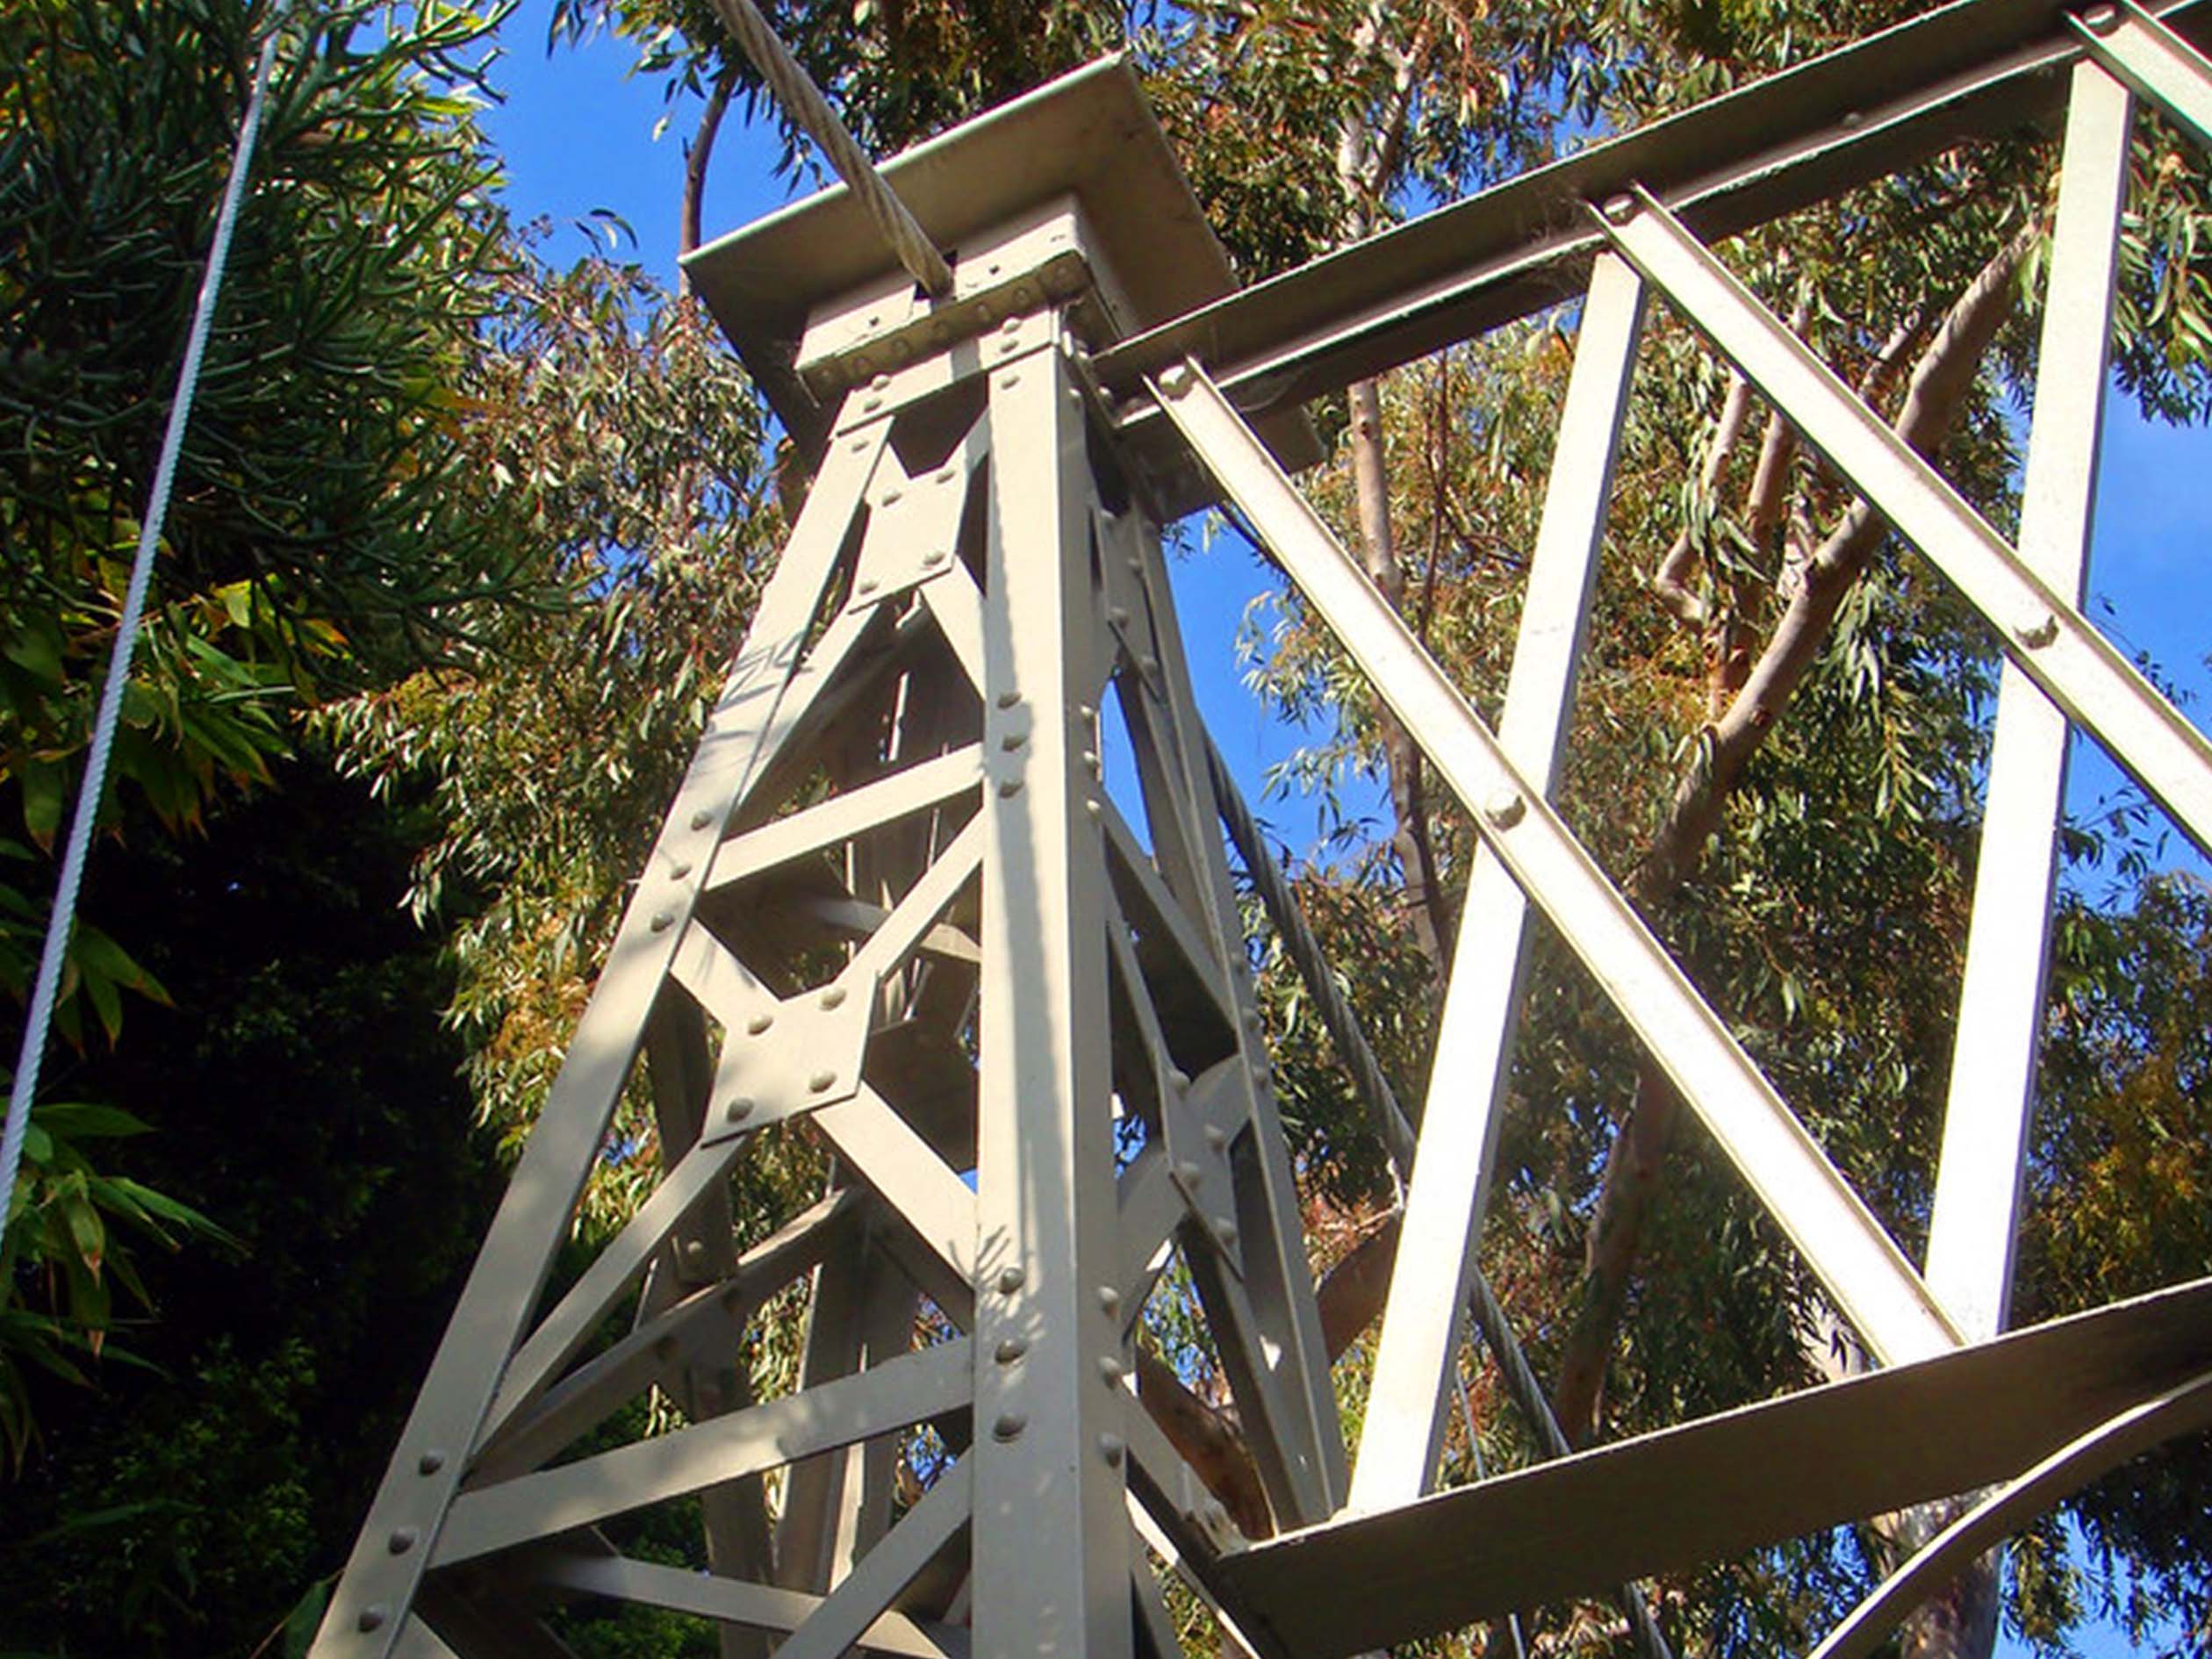 A closeup photo of metal beams holding up the suspension lines on spruce street suspension bridge with trees in the background.